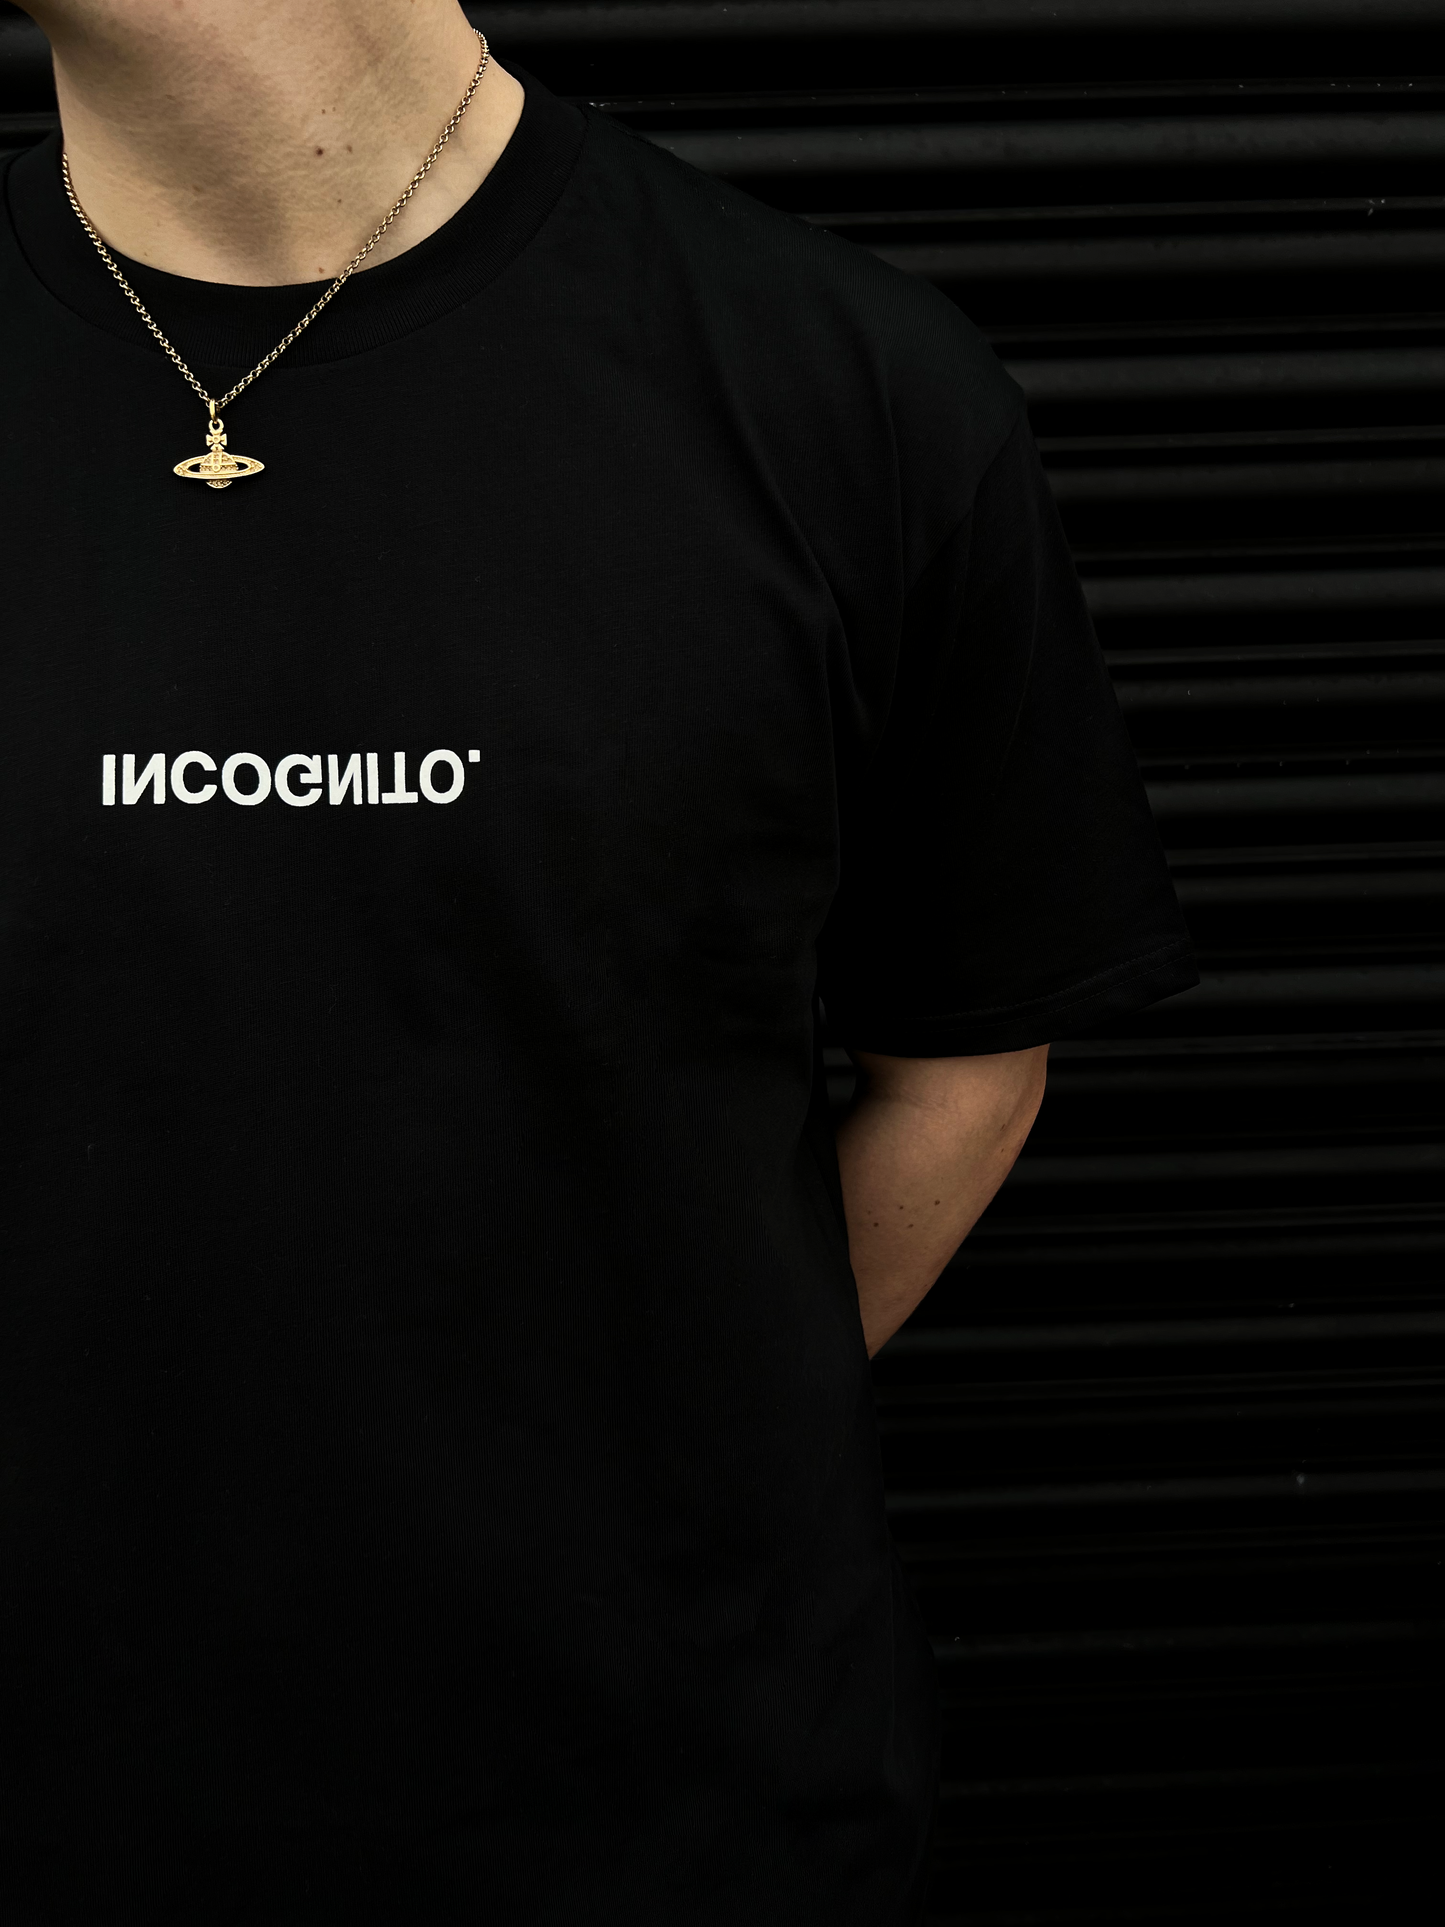 Black i for INCOGNITO T-Shirt